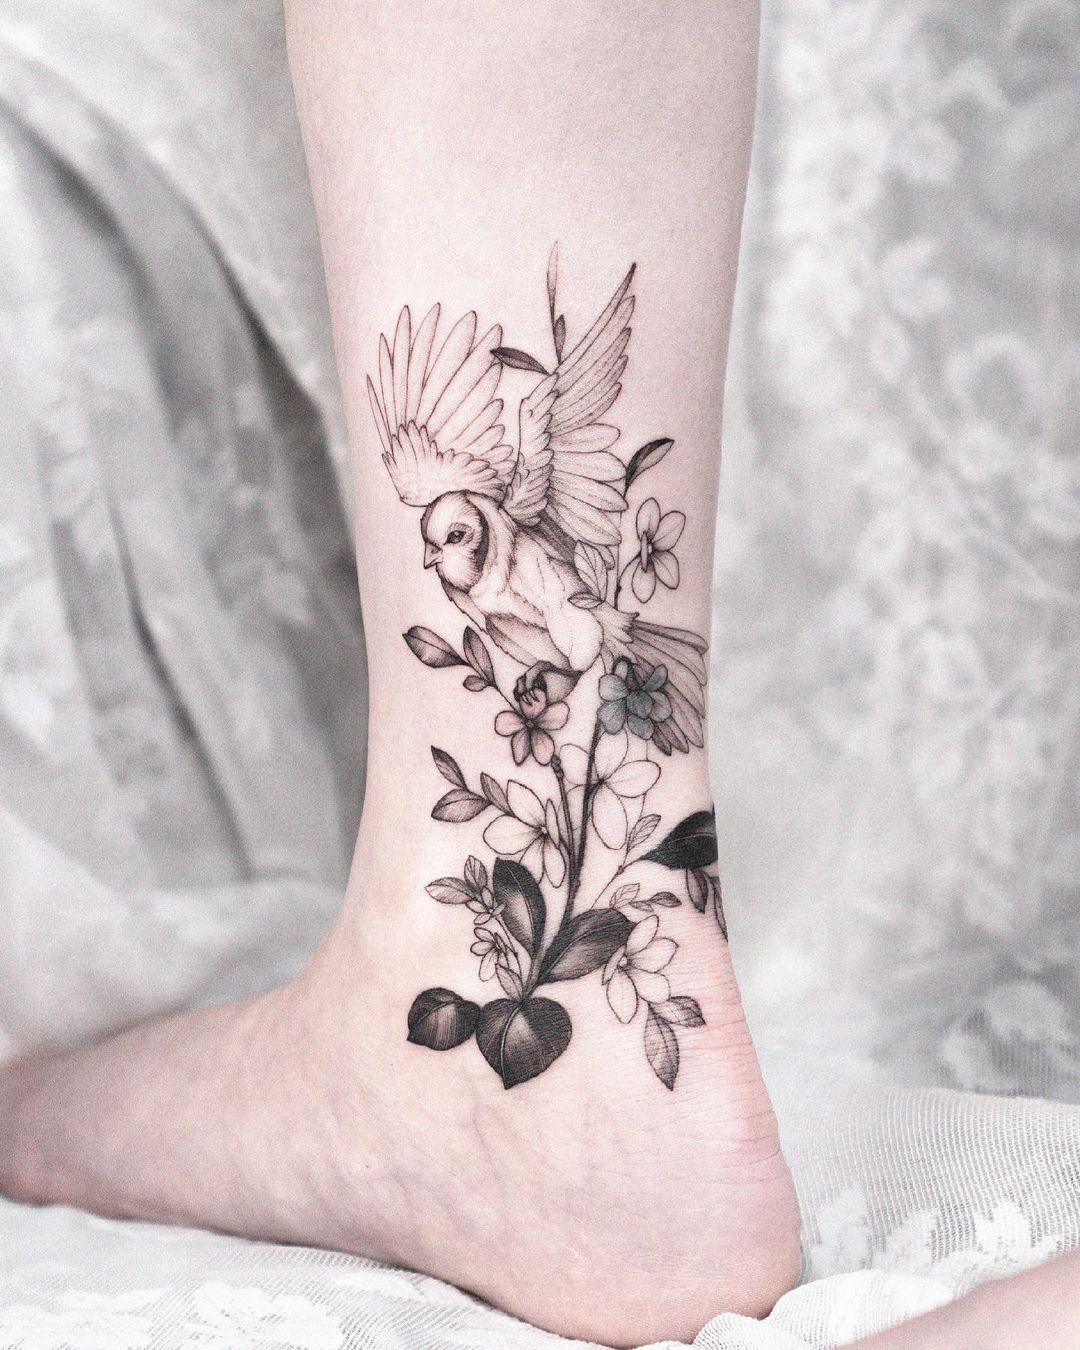 15+ Super Cool Tattoos For Women images 4